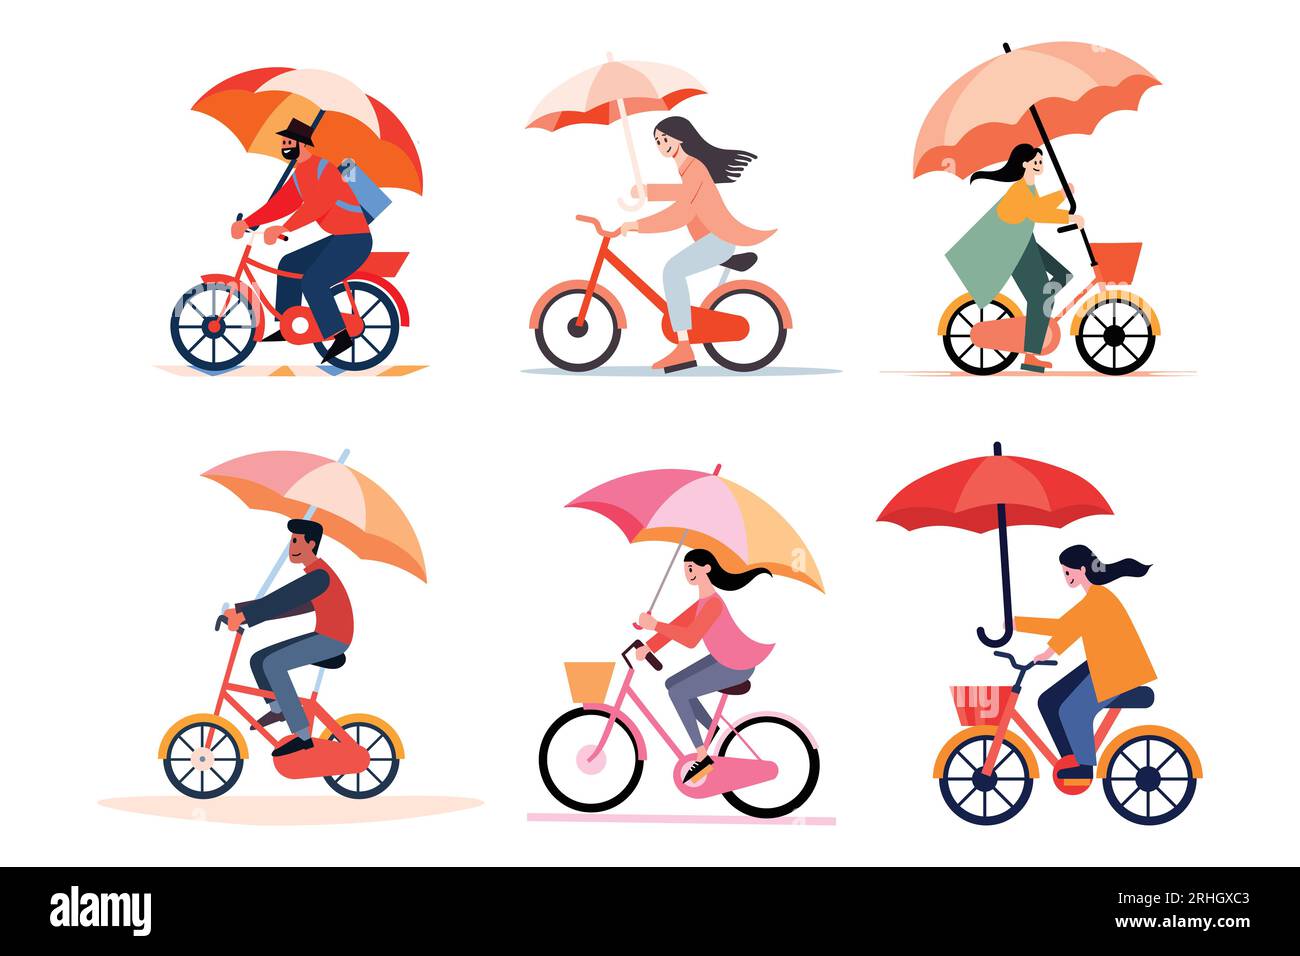 Hand Drawn man riding a bicycle and holding an umbrella in flat style isolated on background Stock Vector